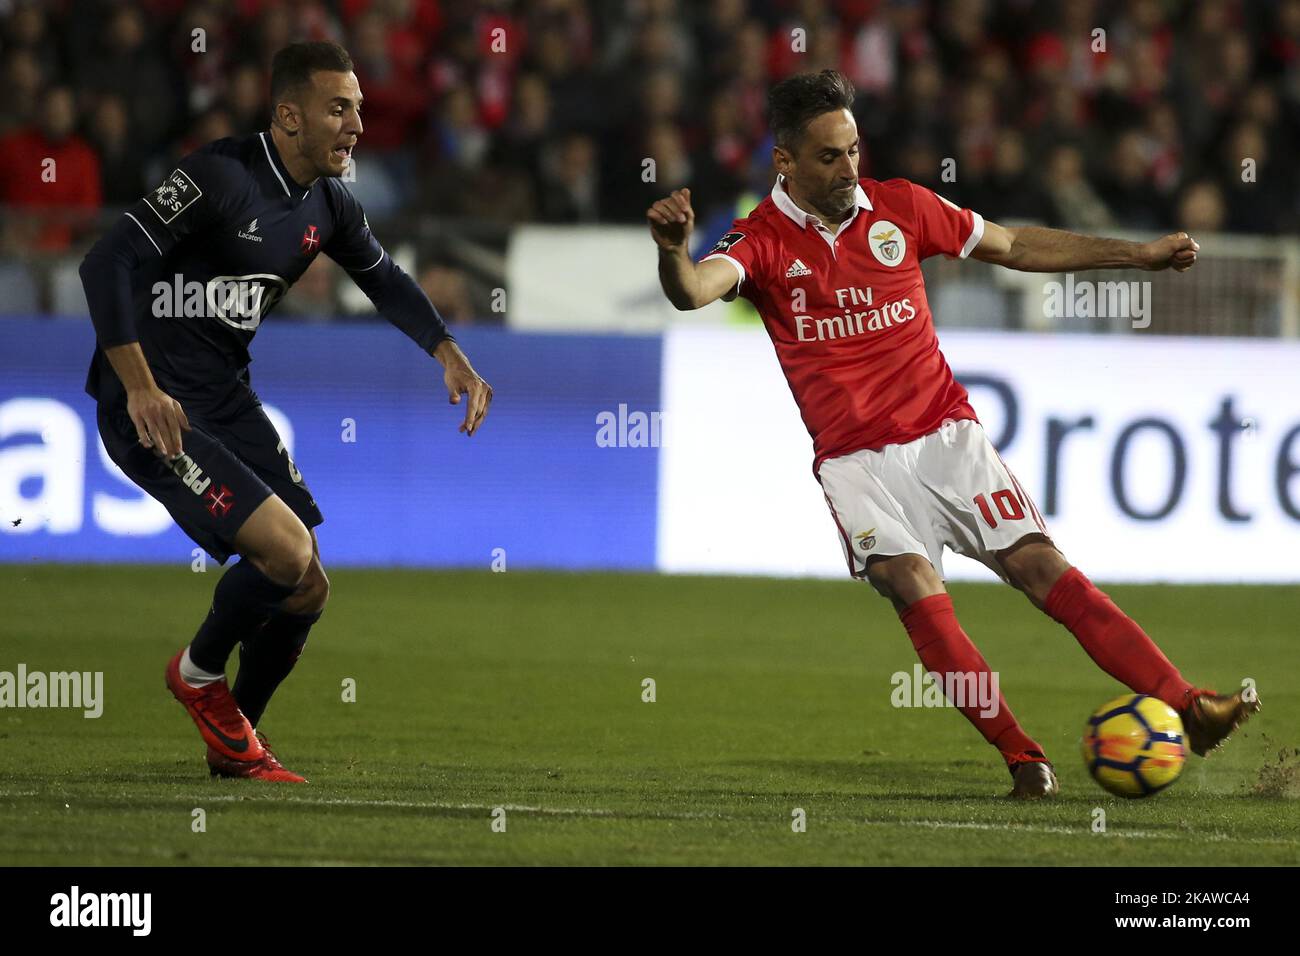 Benfica's forward Jonas (R) vies with Belenenses's midfielder Hassan Yebda during the Portuguese League football match between CF Belenenses and SL Benfica at Restelo Stadium in Lisbon, Portugal on January 29, 2018. (Photo by Carlos Costa/NurPhoto) Stock Photo